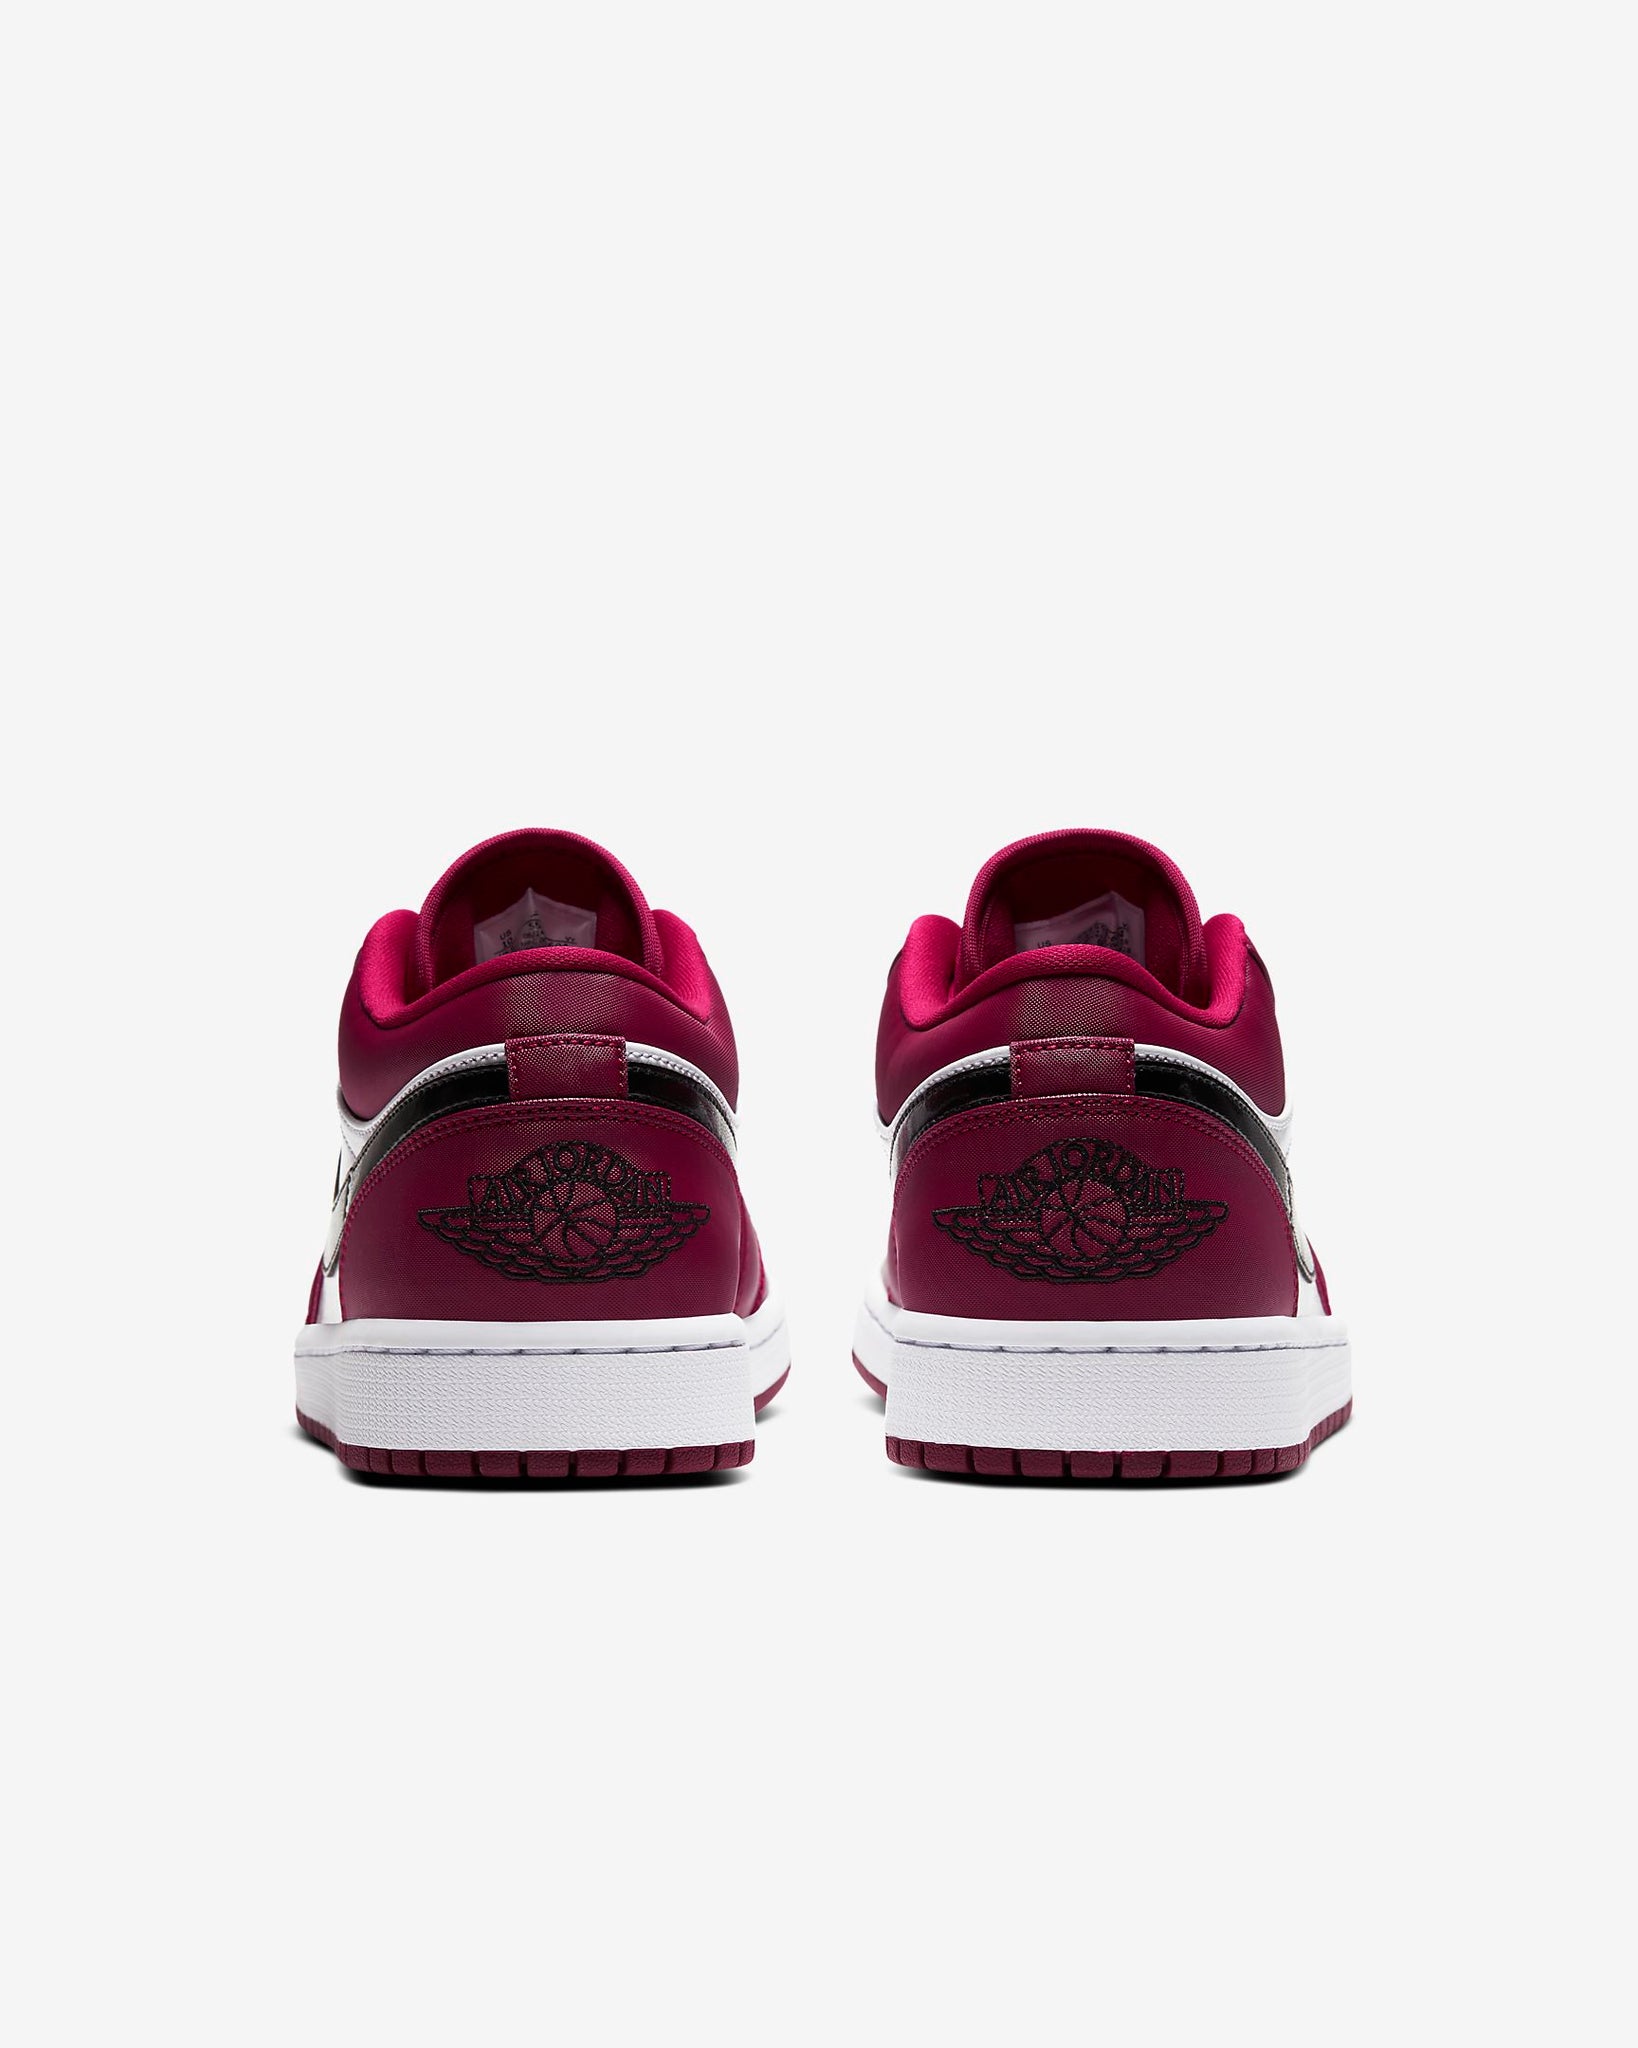 j1 low noble red price philippines